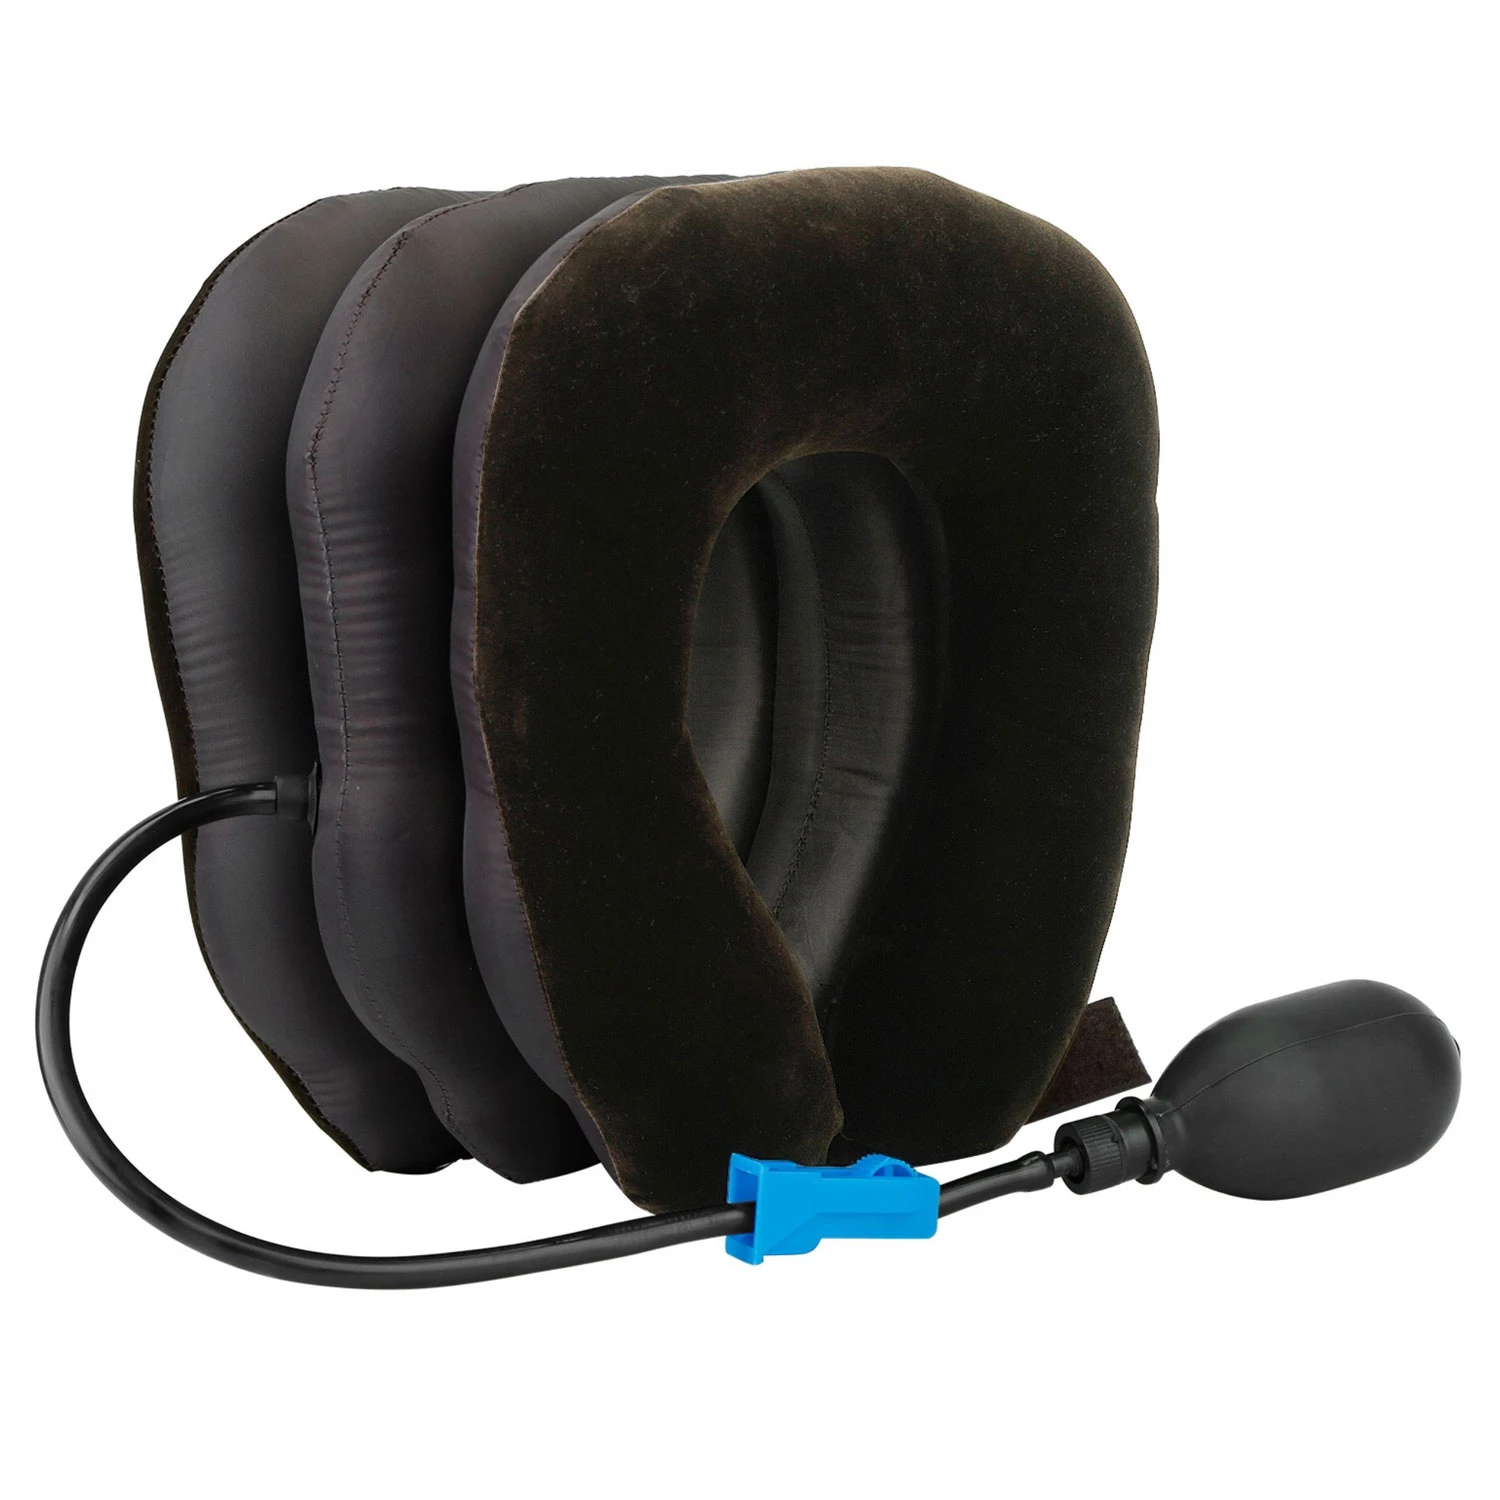 Inflatable Neck Traction Pillow - Travel Support for Neck, Shoulder And Spine Alignment